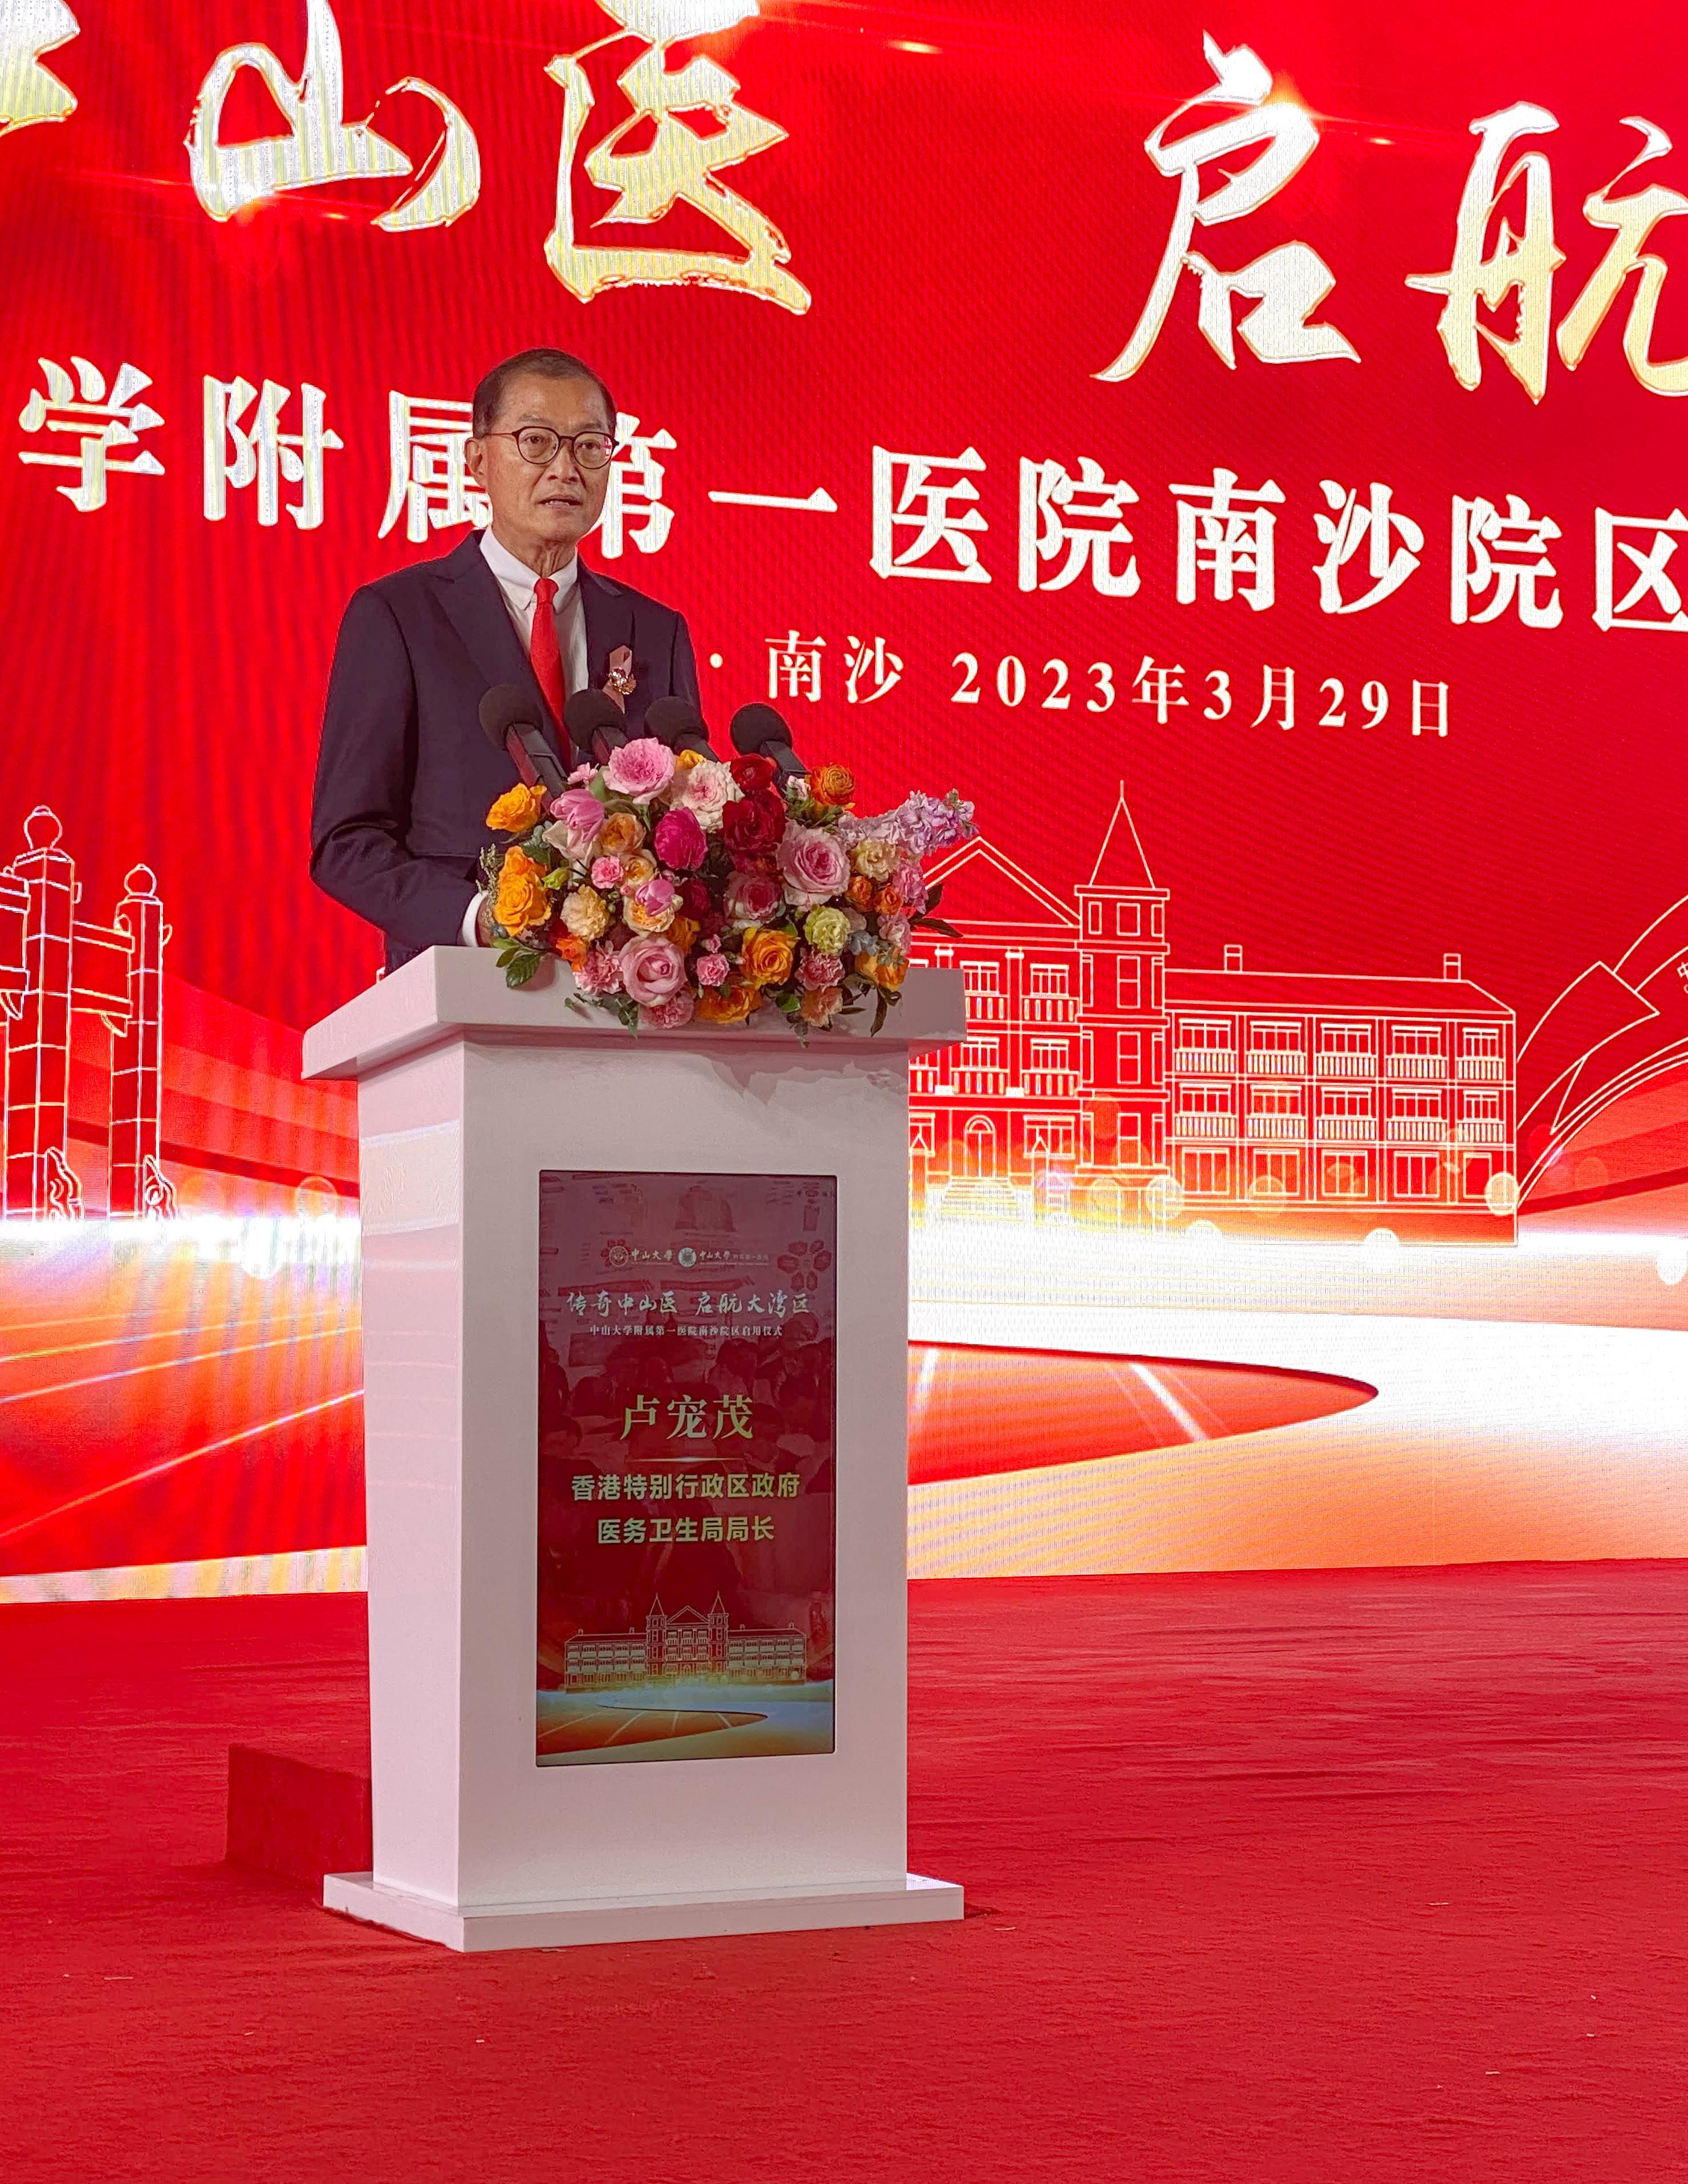 The Secretary for Health, Professor Lo Chung-mau, delivers a speech at the opening ceremony of the Nansha International Hospital of the First Affiliated Hospital, Sun Yat-sen University this morning (March 29).

